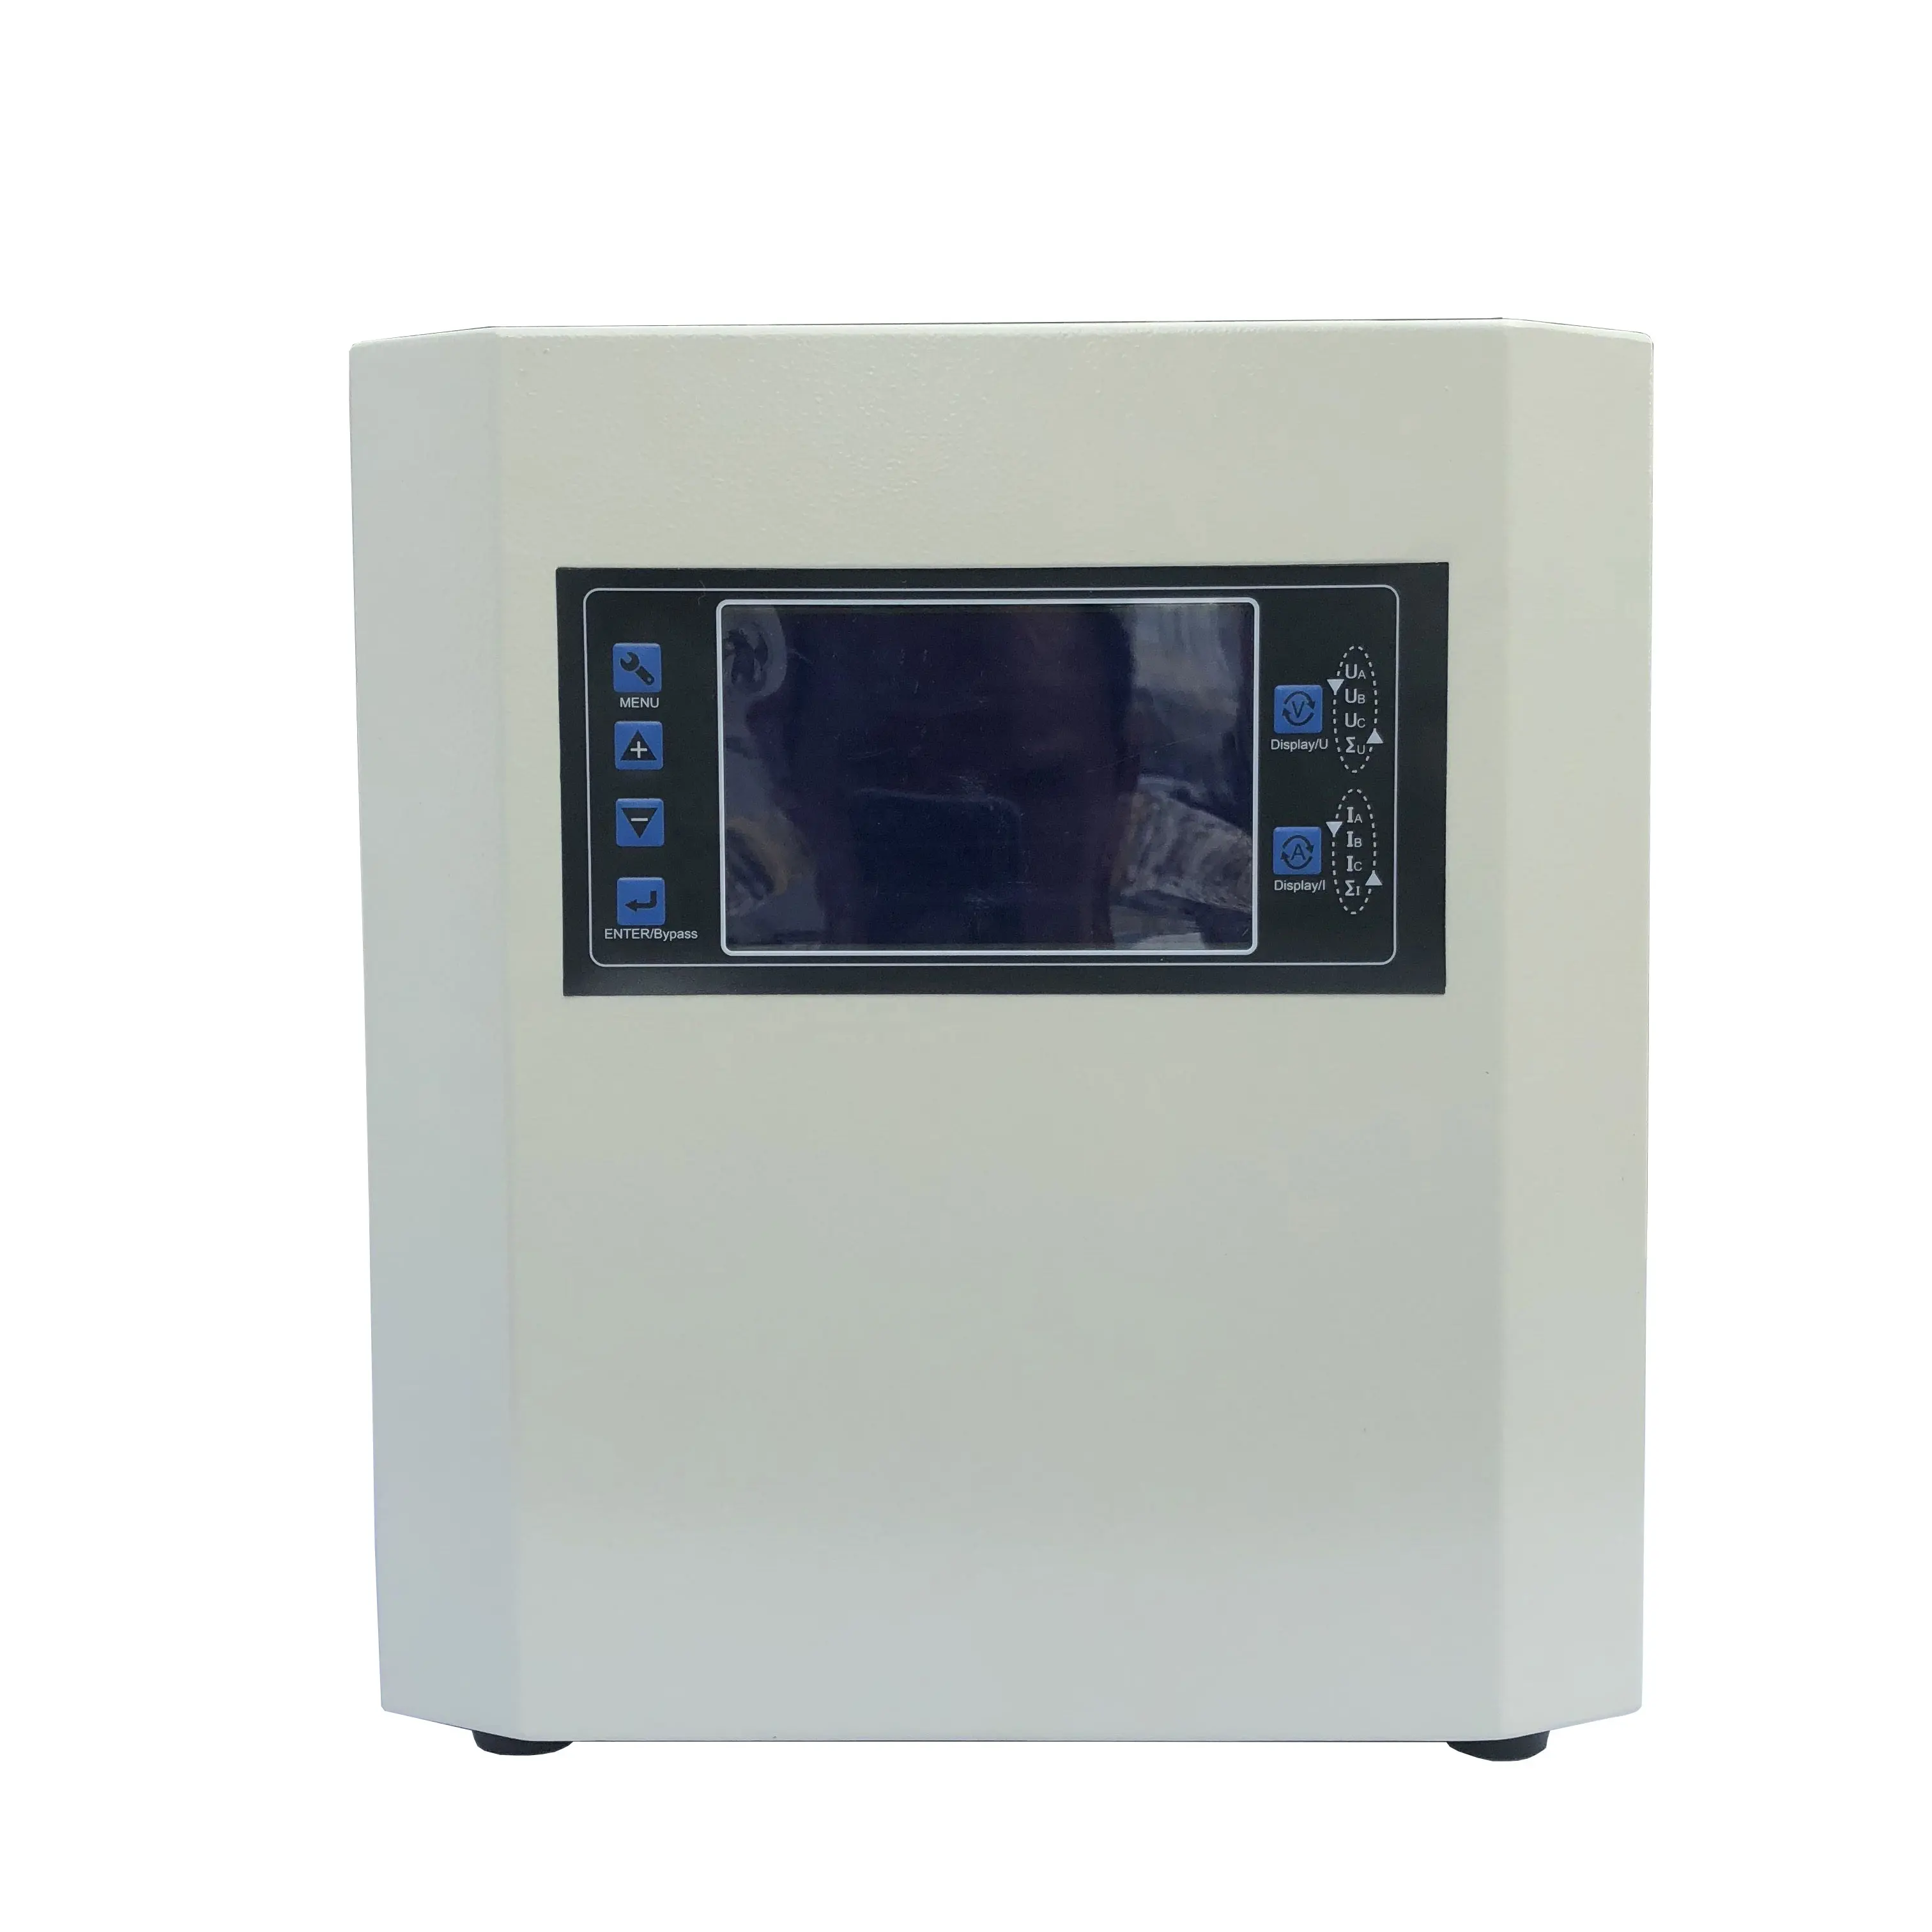 Goter Power Full System Protection Save Electricity Cost Reliable Performance 3KVA Single Phase Voltage Stabilizer